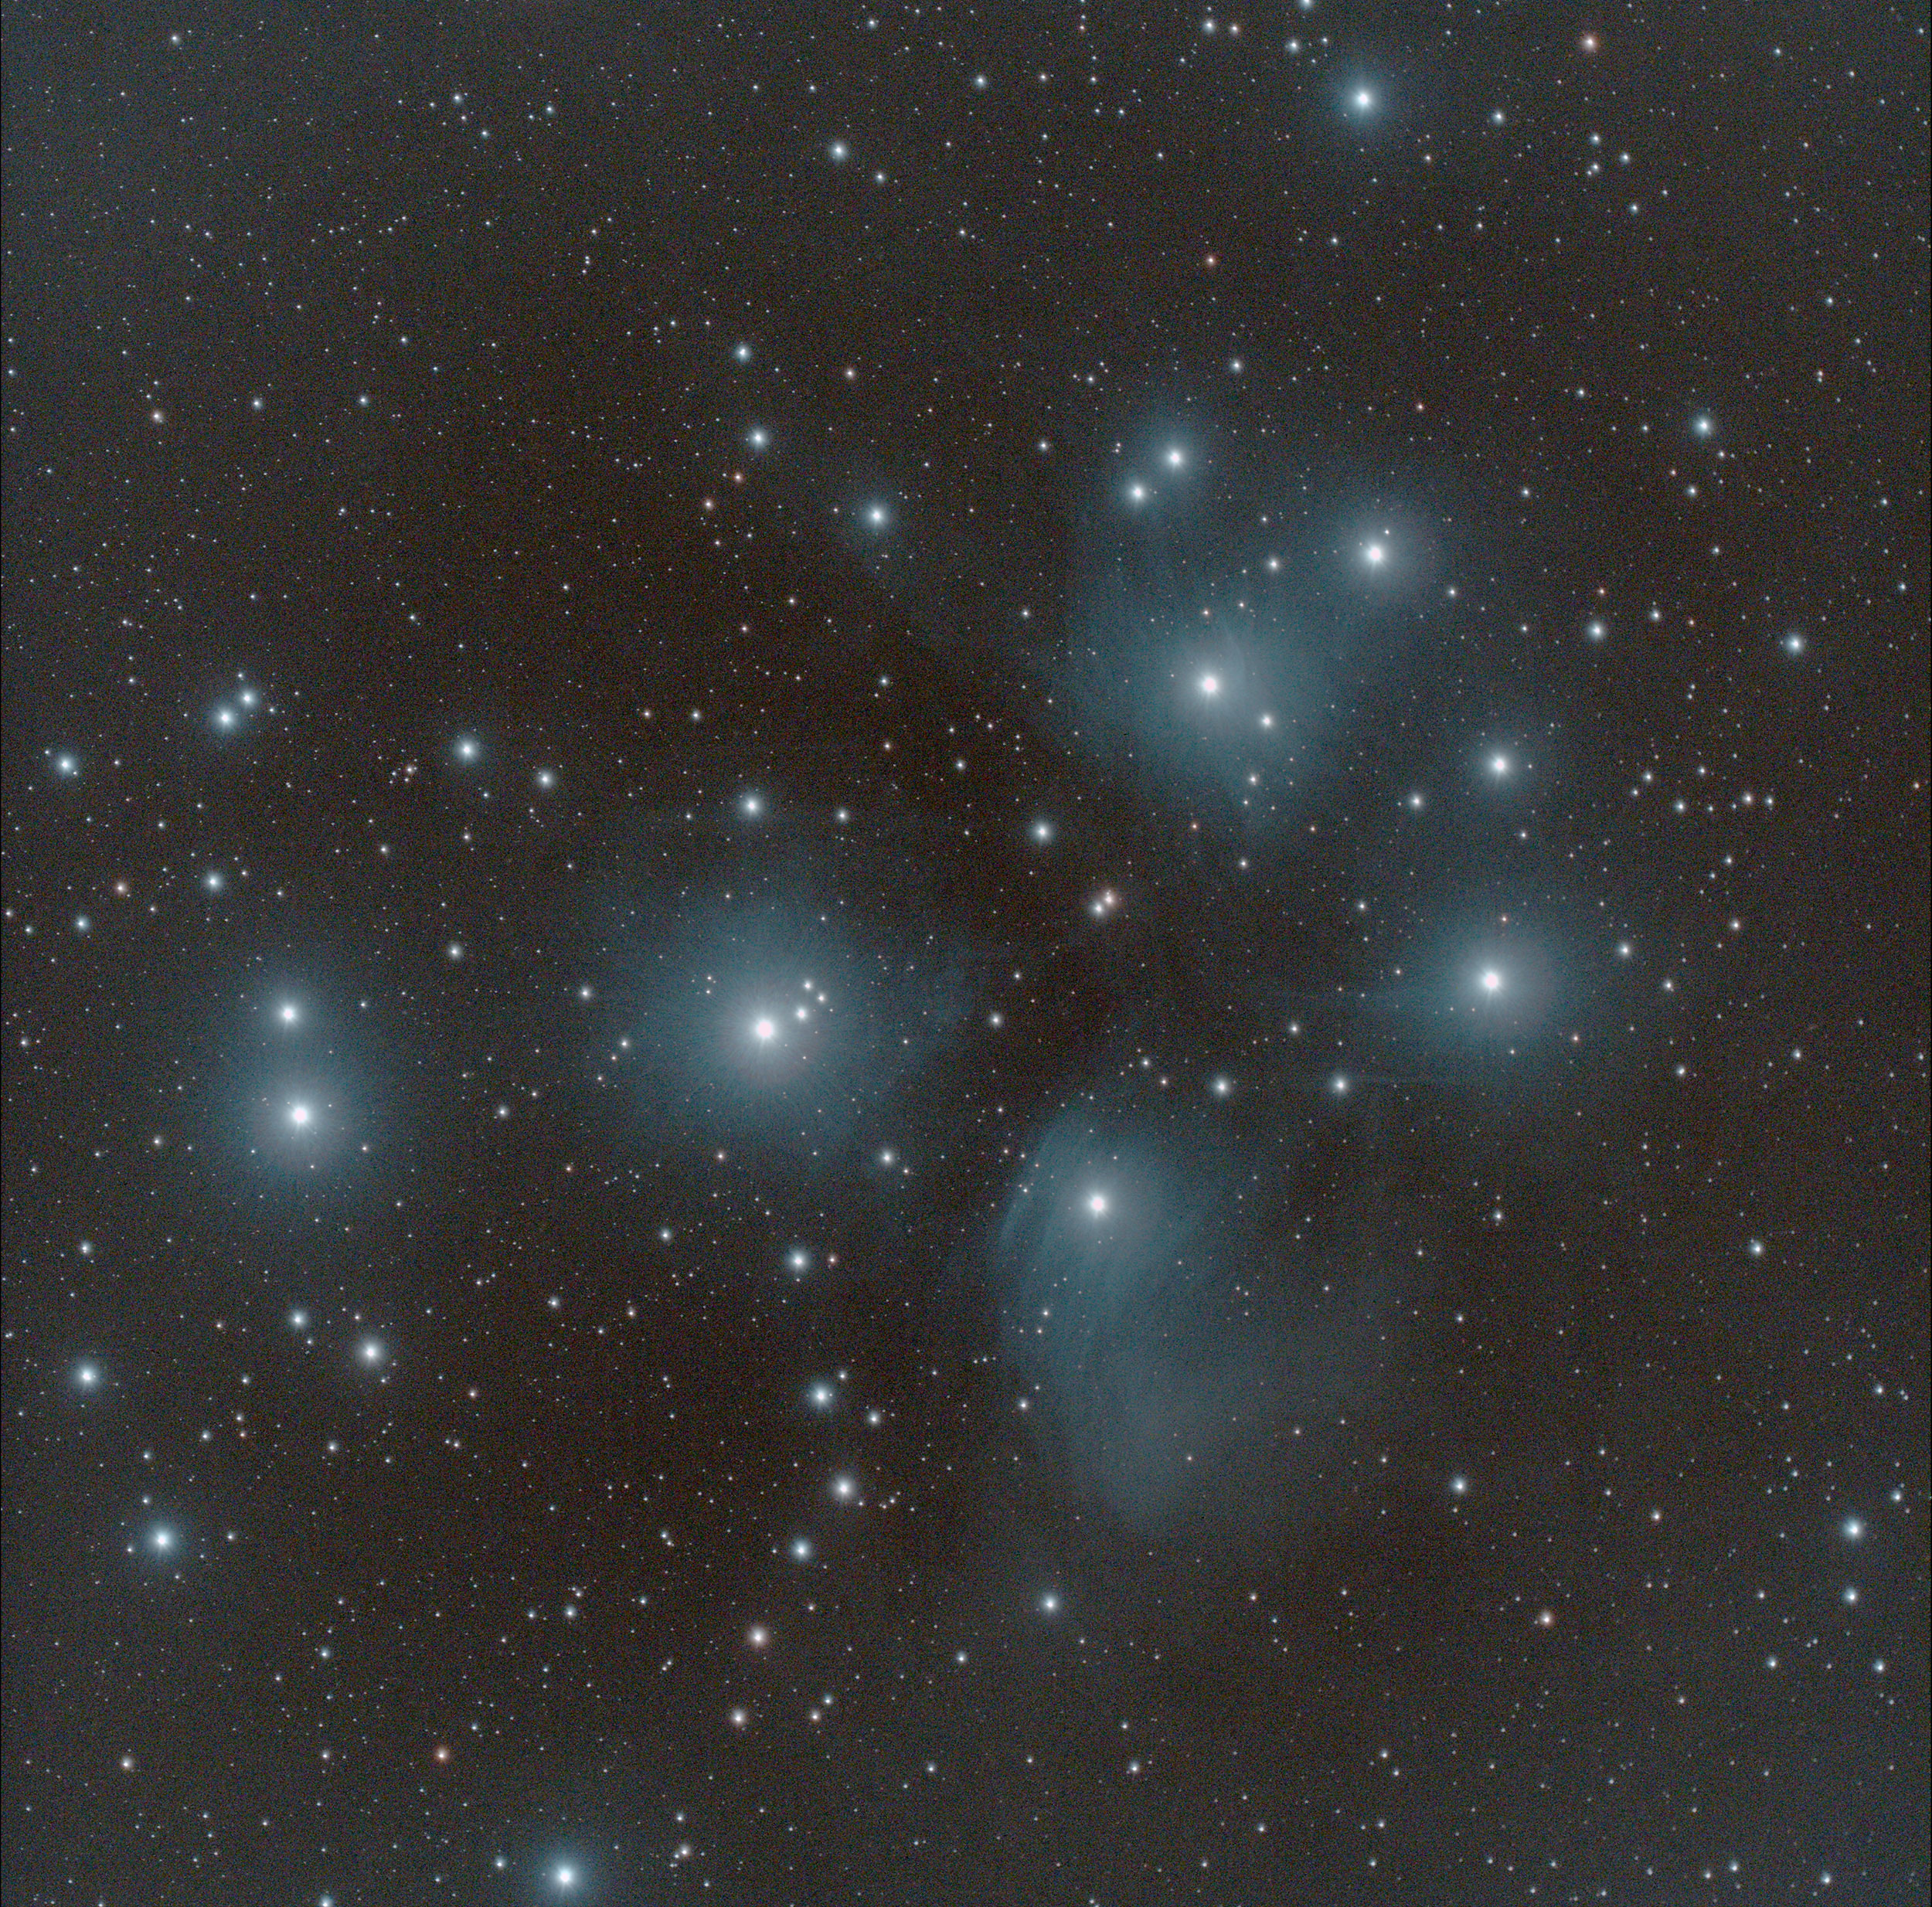 M45 the Pleiades, an Open Cluster visible to the naked eye. Credit: Mike Barrett